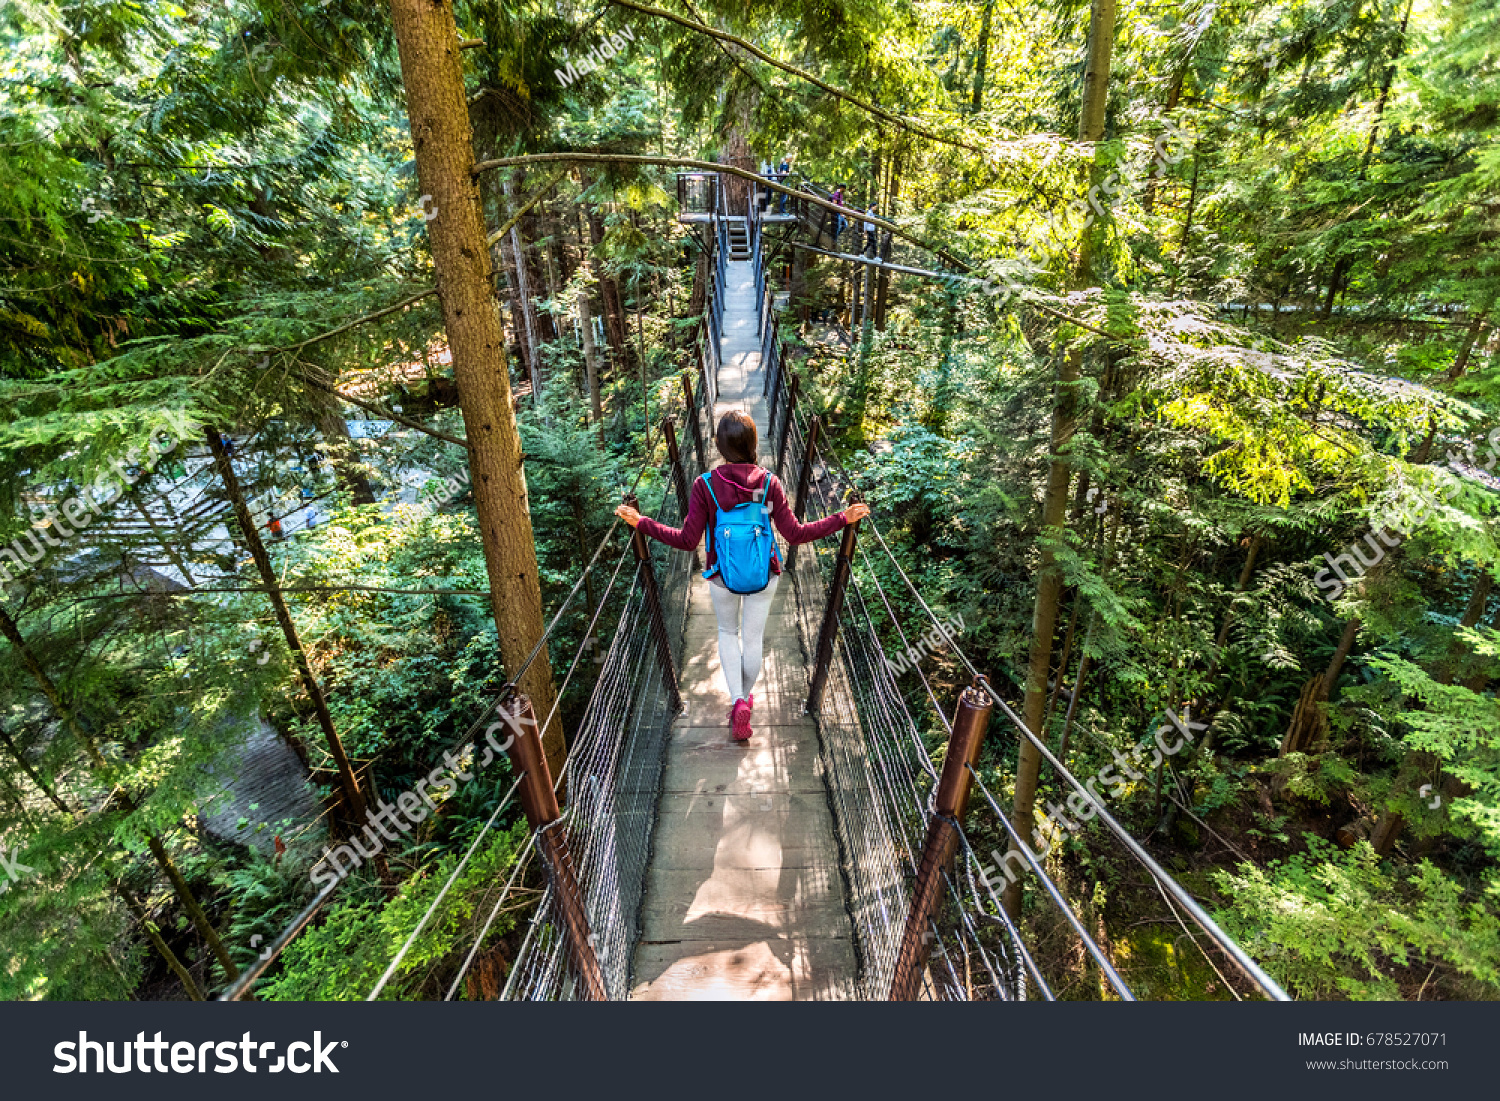 Canada travel tourist woman walking in famous attraction Capilano Suspension Bridge in North Vancouver, British Columbia, canadian vacation destination for tourism. #678527071